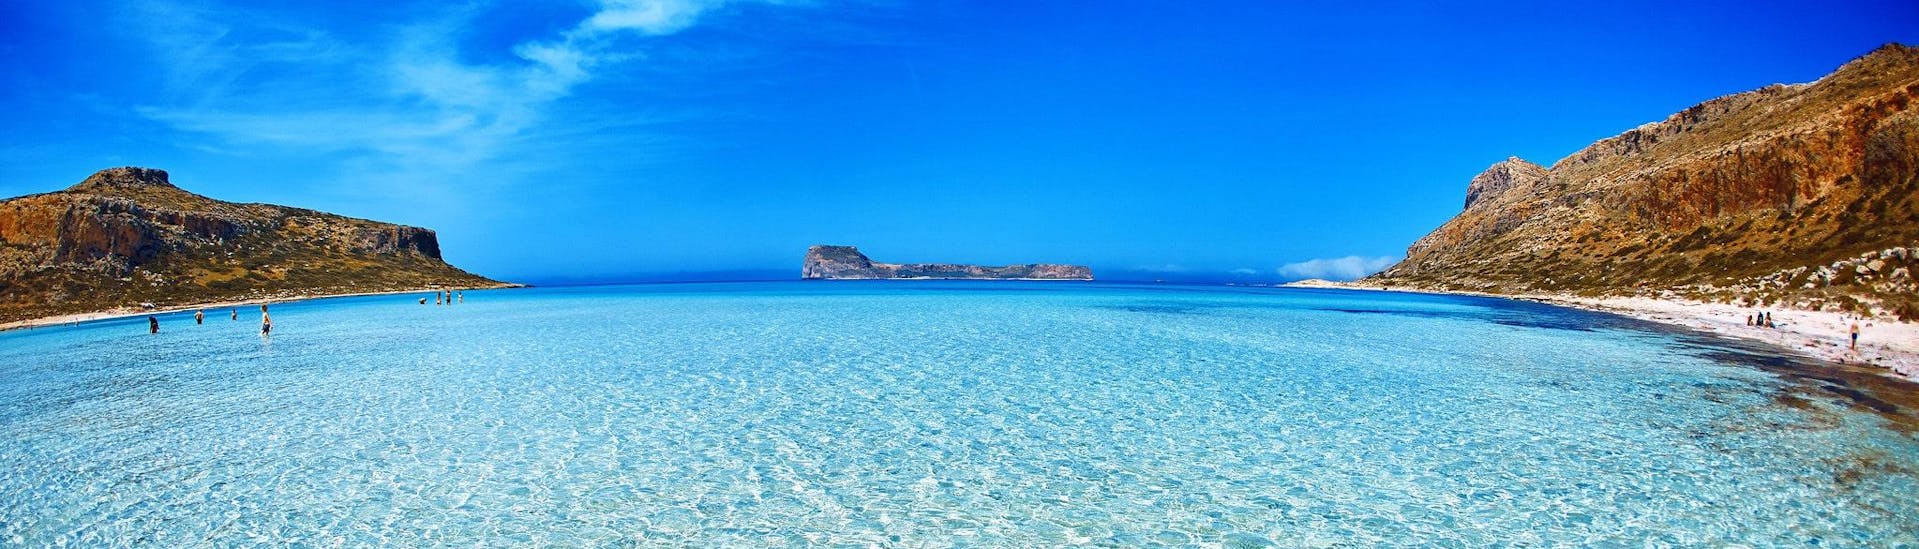 The stunning Balos Lagoon, which can be visited during many boat trips in Crete.